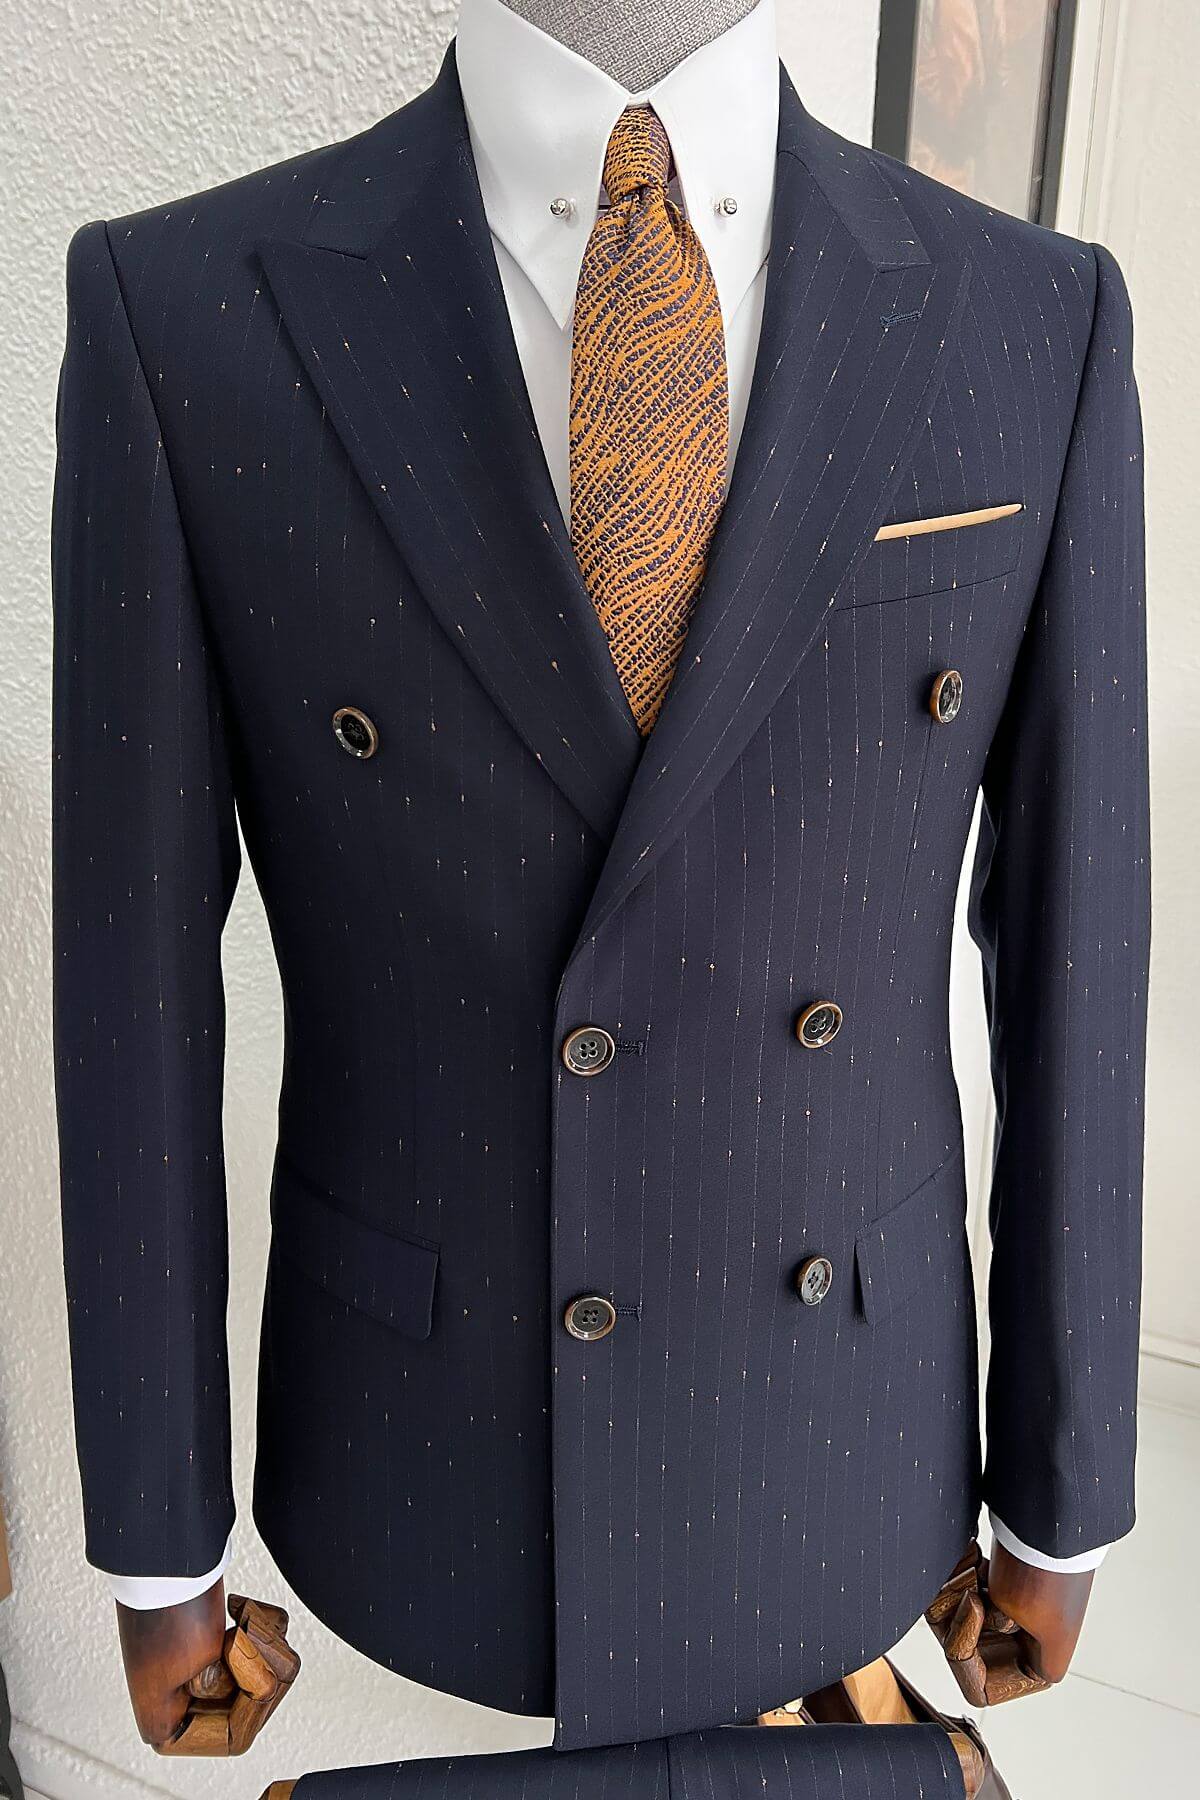 A Double-Breasted Navy-Blue Wool Suit on display